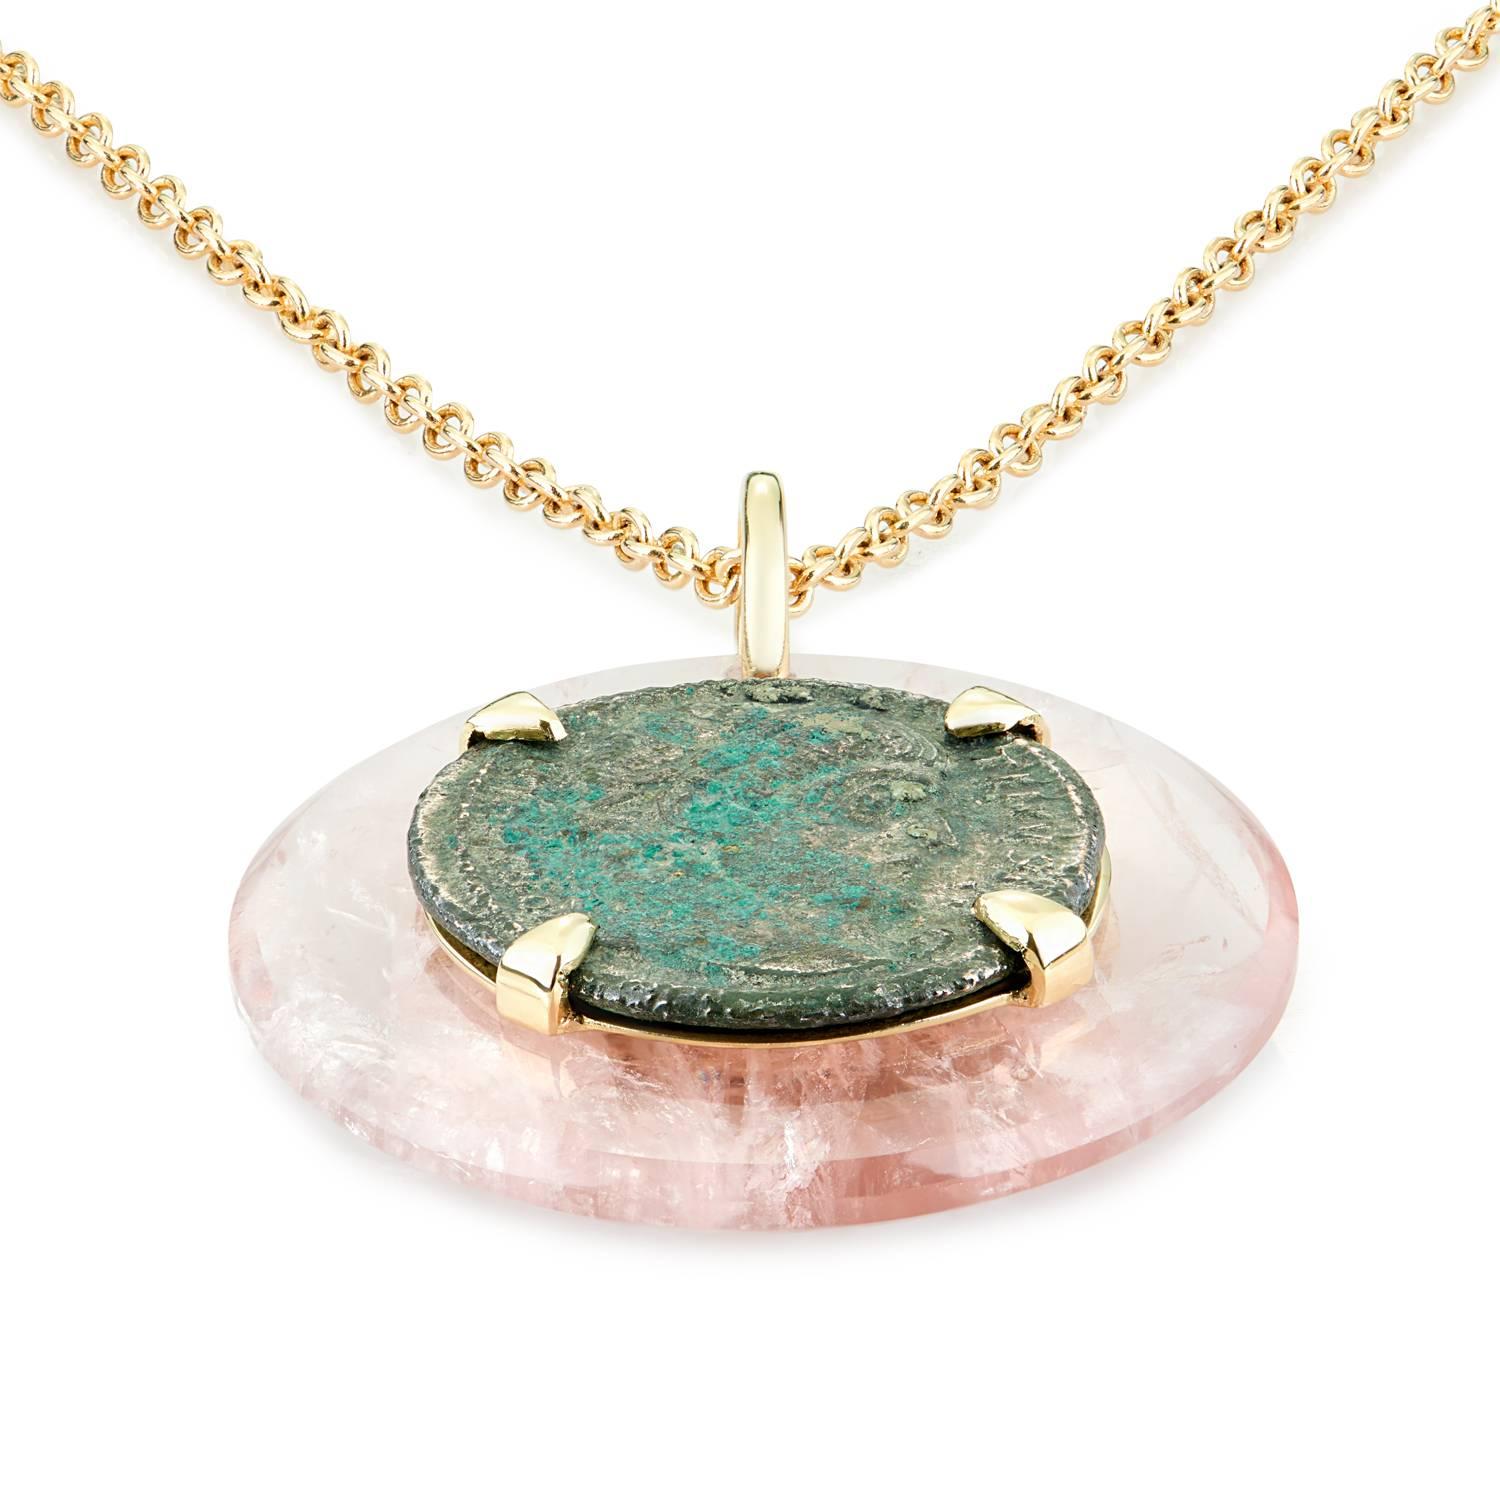 This DUBINI coin necklace from the 'Empires' collection features an authentic Roman bronze coin minted circa 307-337 A.D. set in 18K yellow gold with rose quartz disc.

Disc diameter:  3cm
Chain Length:  75cm included - also available with 60cm or